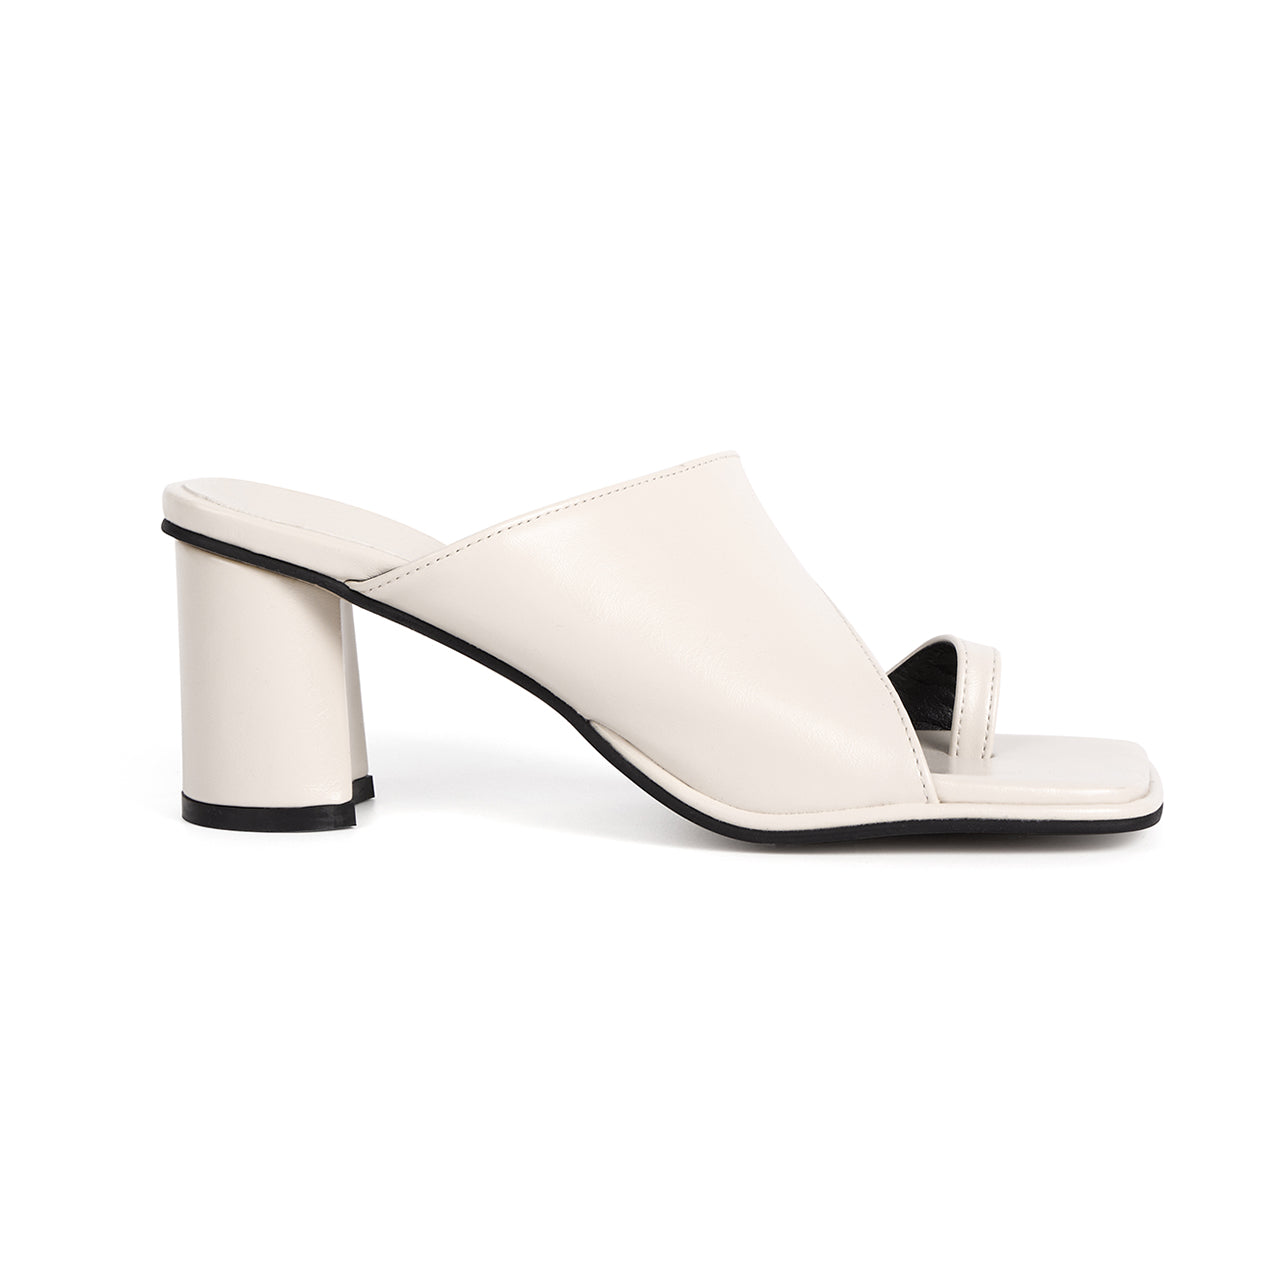 AR-3308 Flip-flop Middle Heeled Mules